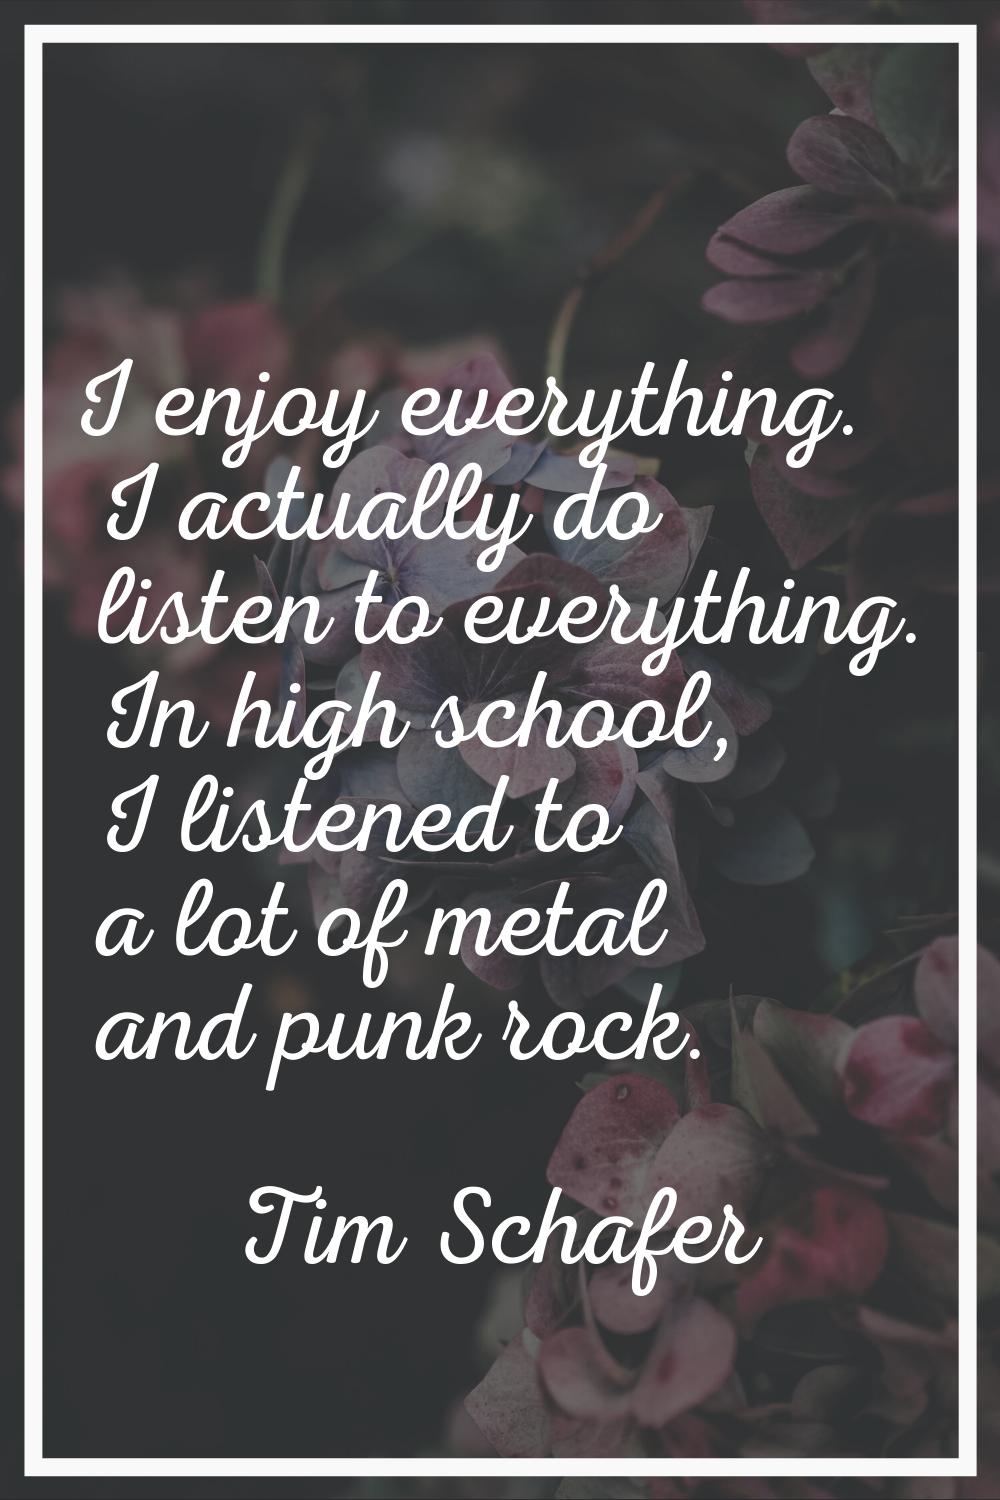 I enjoy everything. I actually do listen to everything. In high school, I listened to a lot of meta